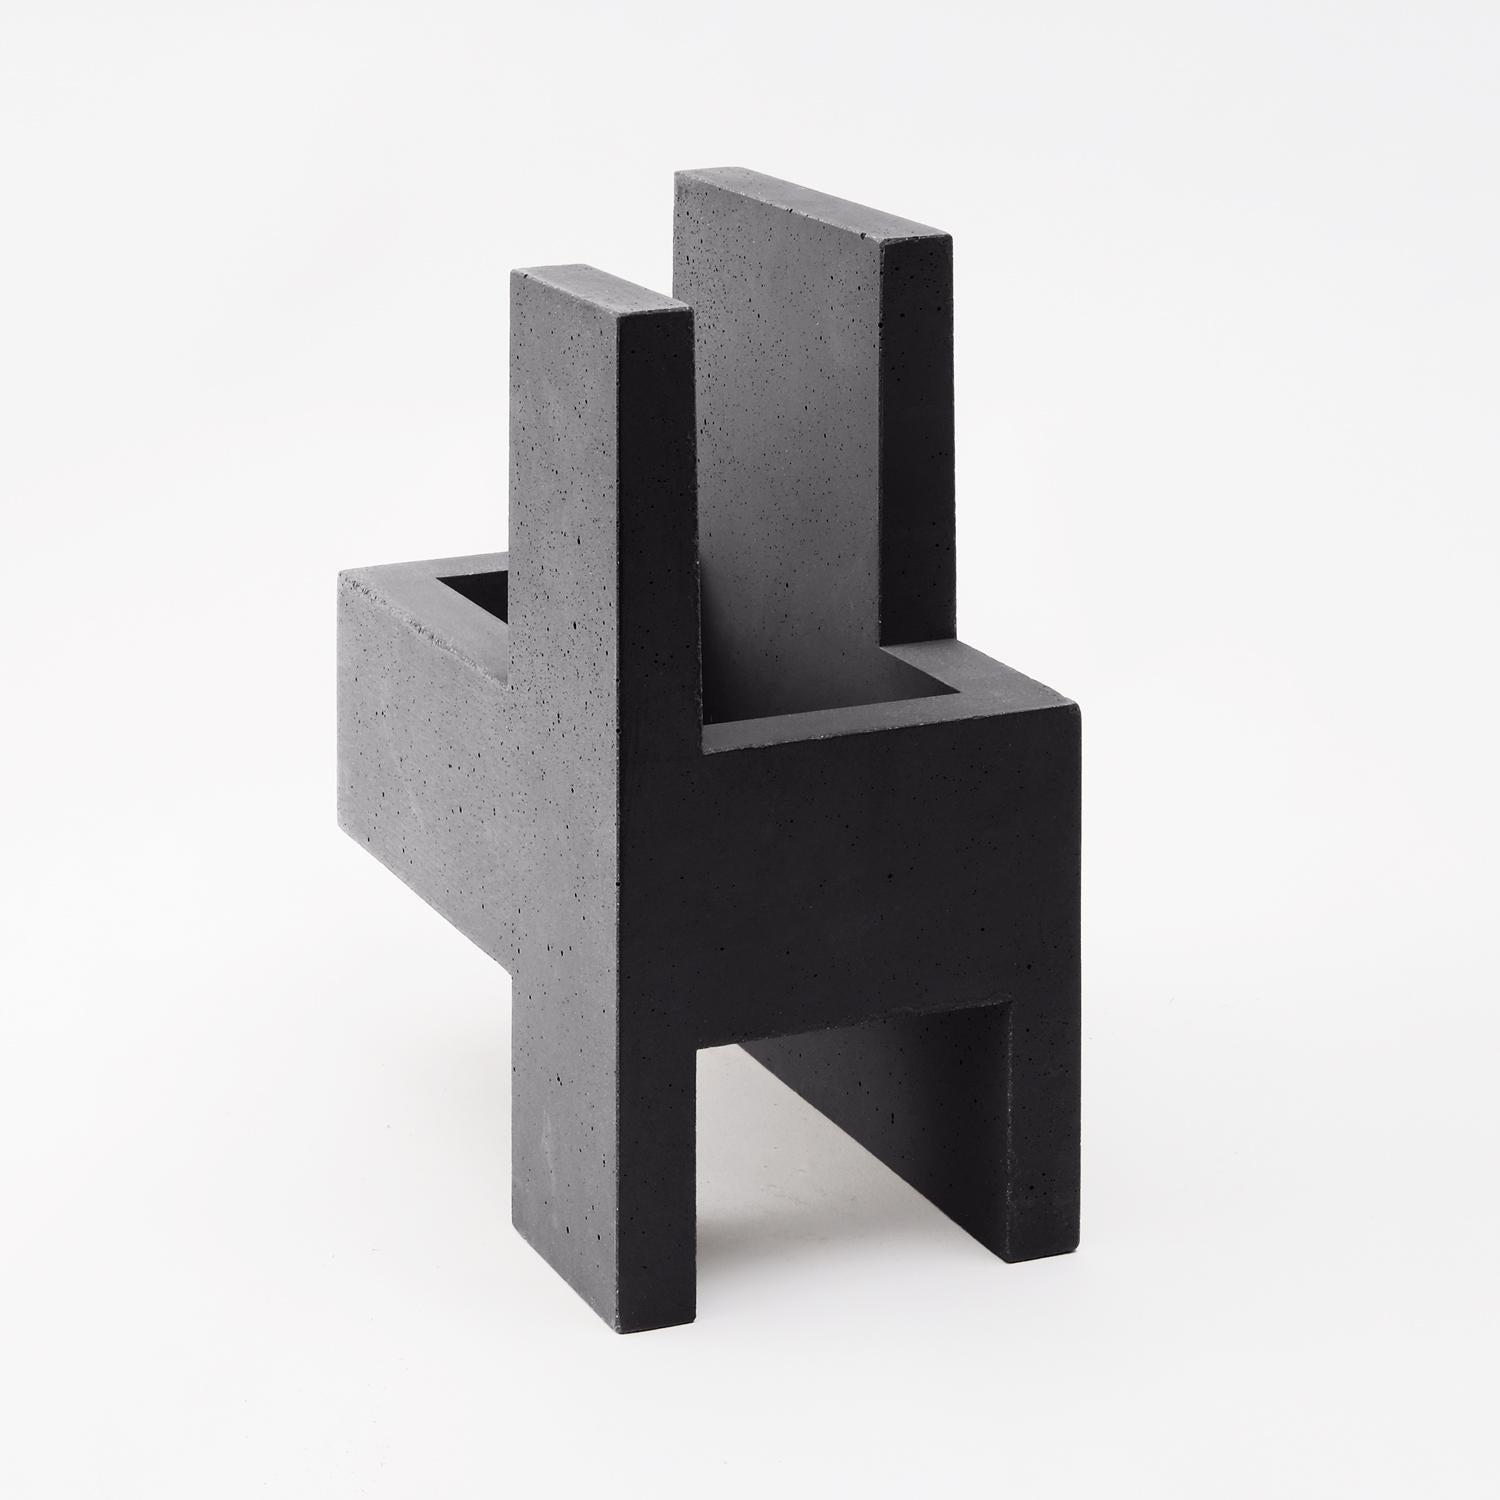 Chandigarh II - Dark Grey - Design Vase Paolo Giordano Cement Cast
Chandigarh II - Dark Grey

Chandigarh is a collection of vases inspired by the homonym city designed by Le Corbusier, who imagined and created it from nothing in India. The vases are